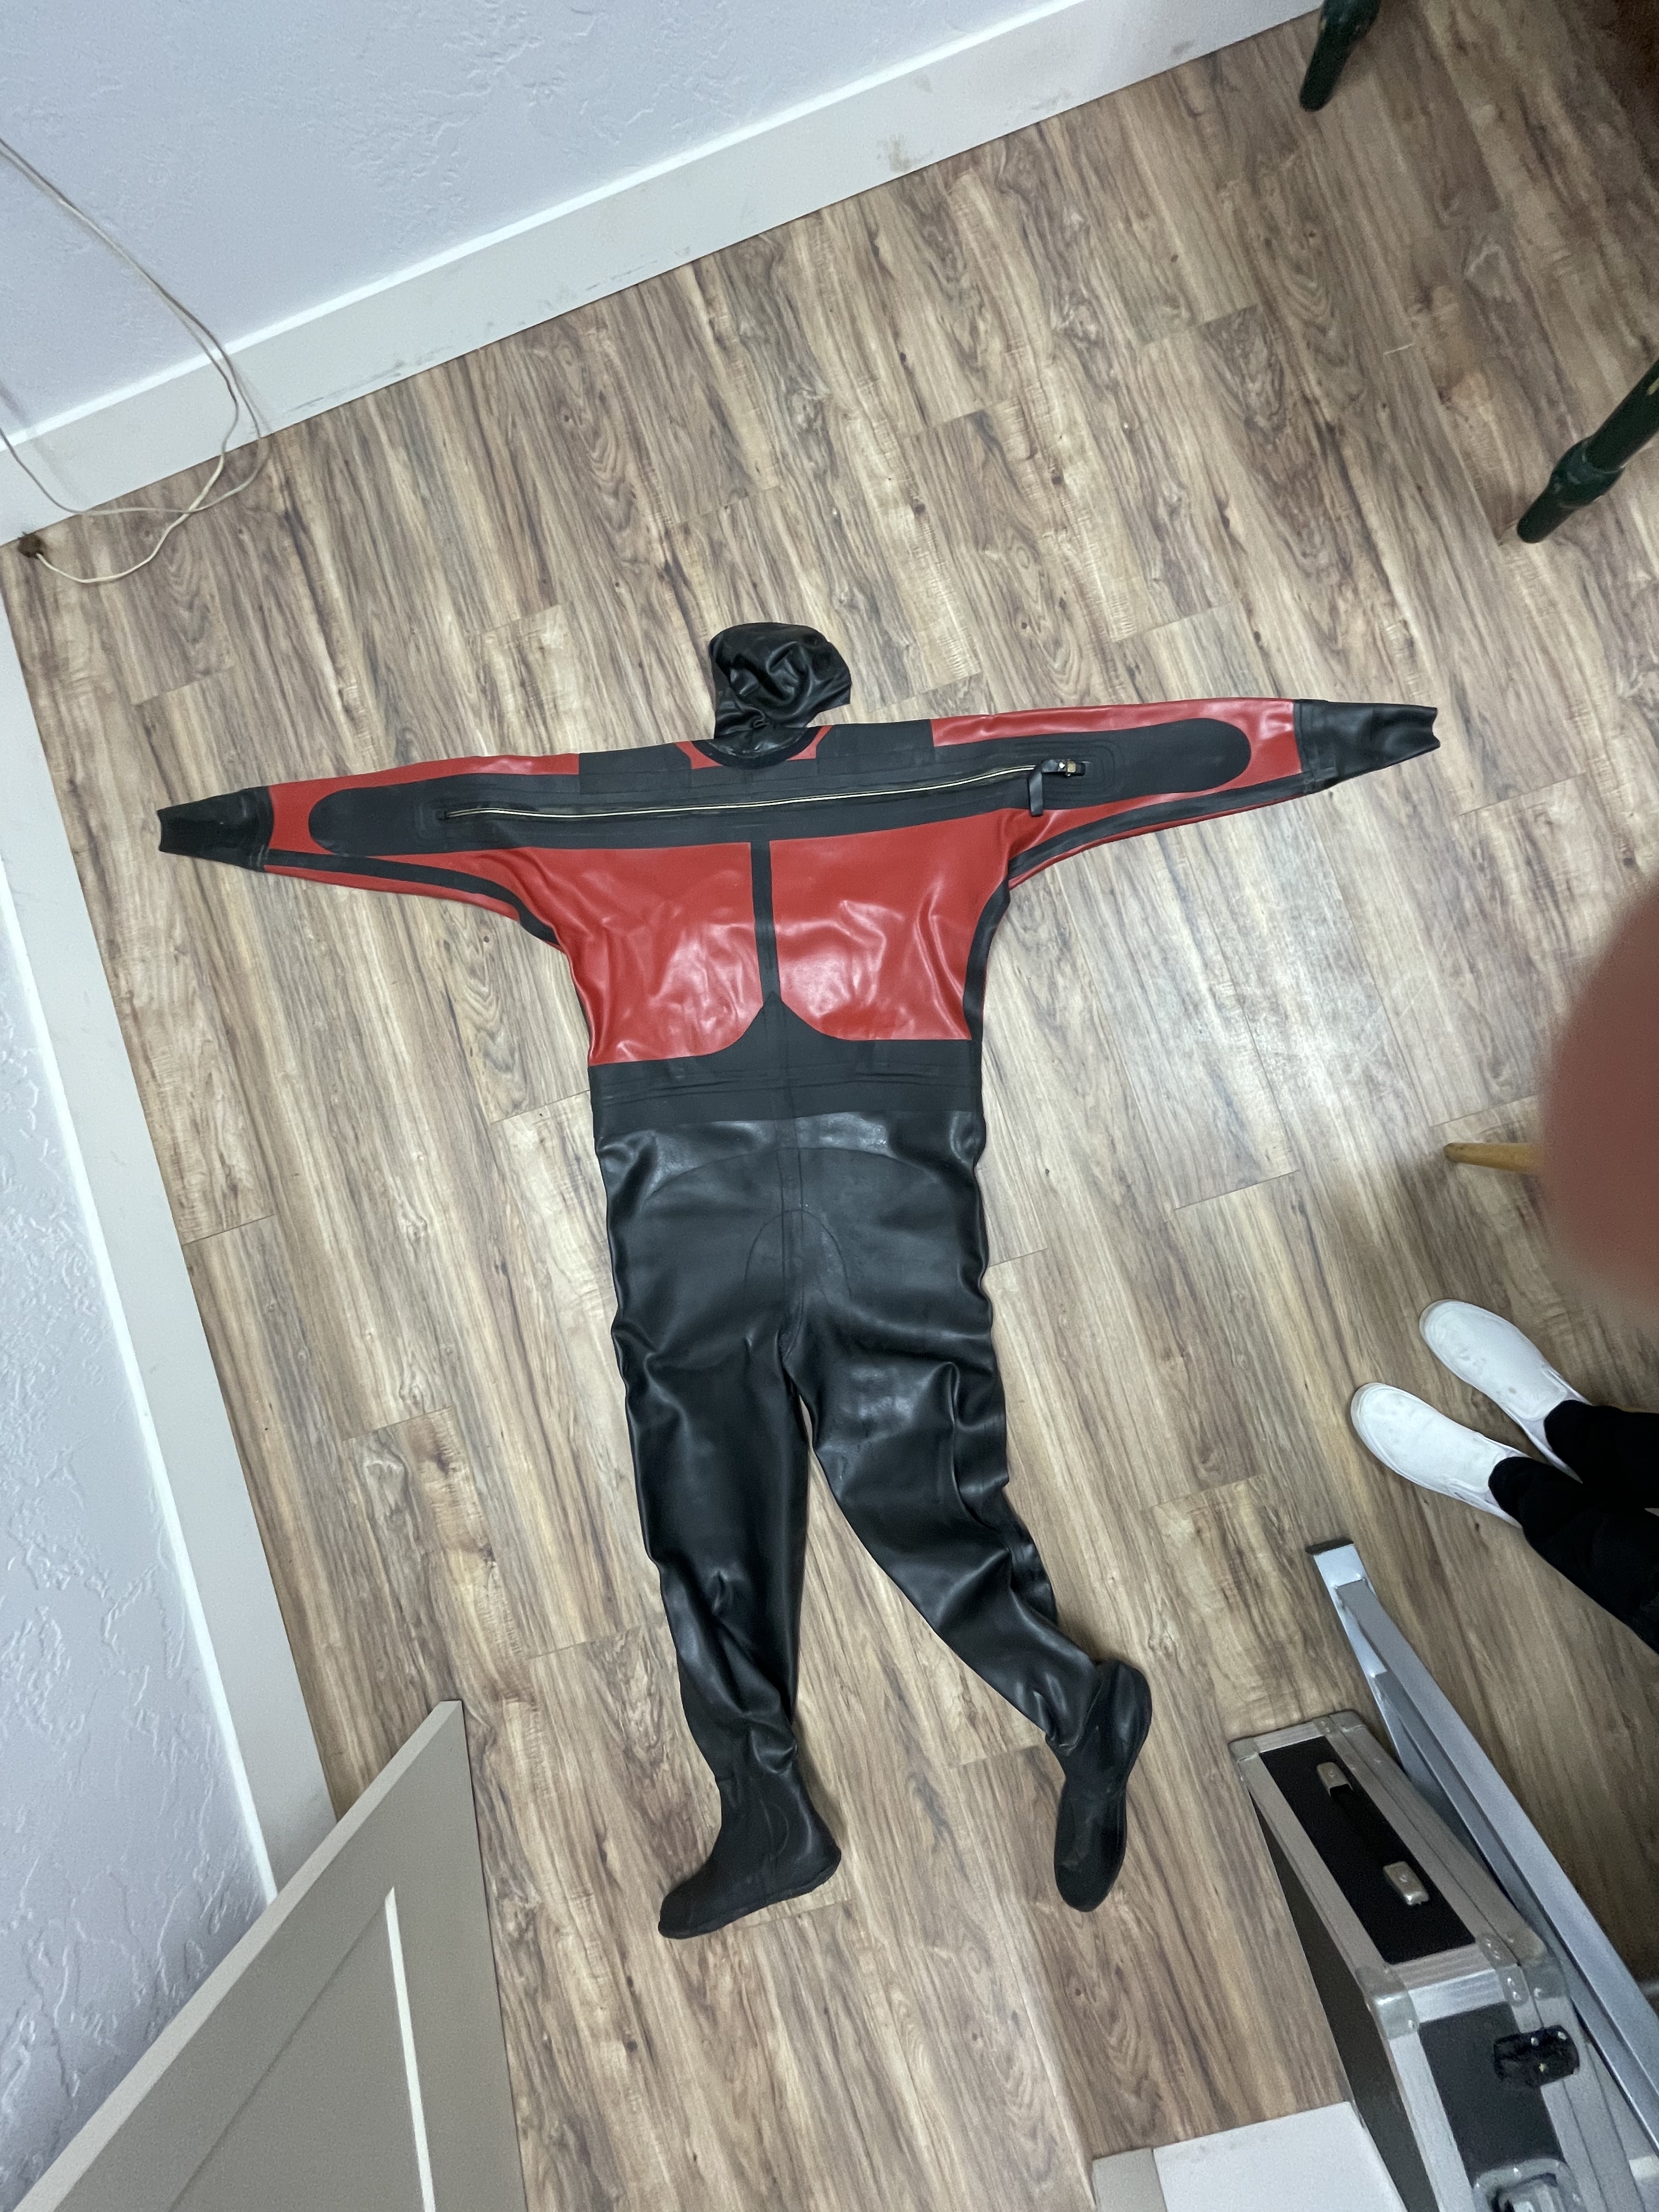 Viking Pro-AM-1050 Drysuit FOR SALE (Used once / Excellent condition)